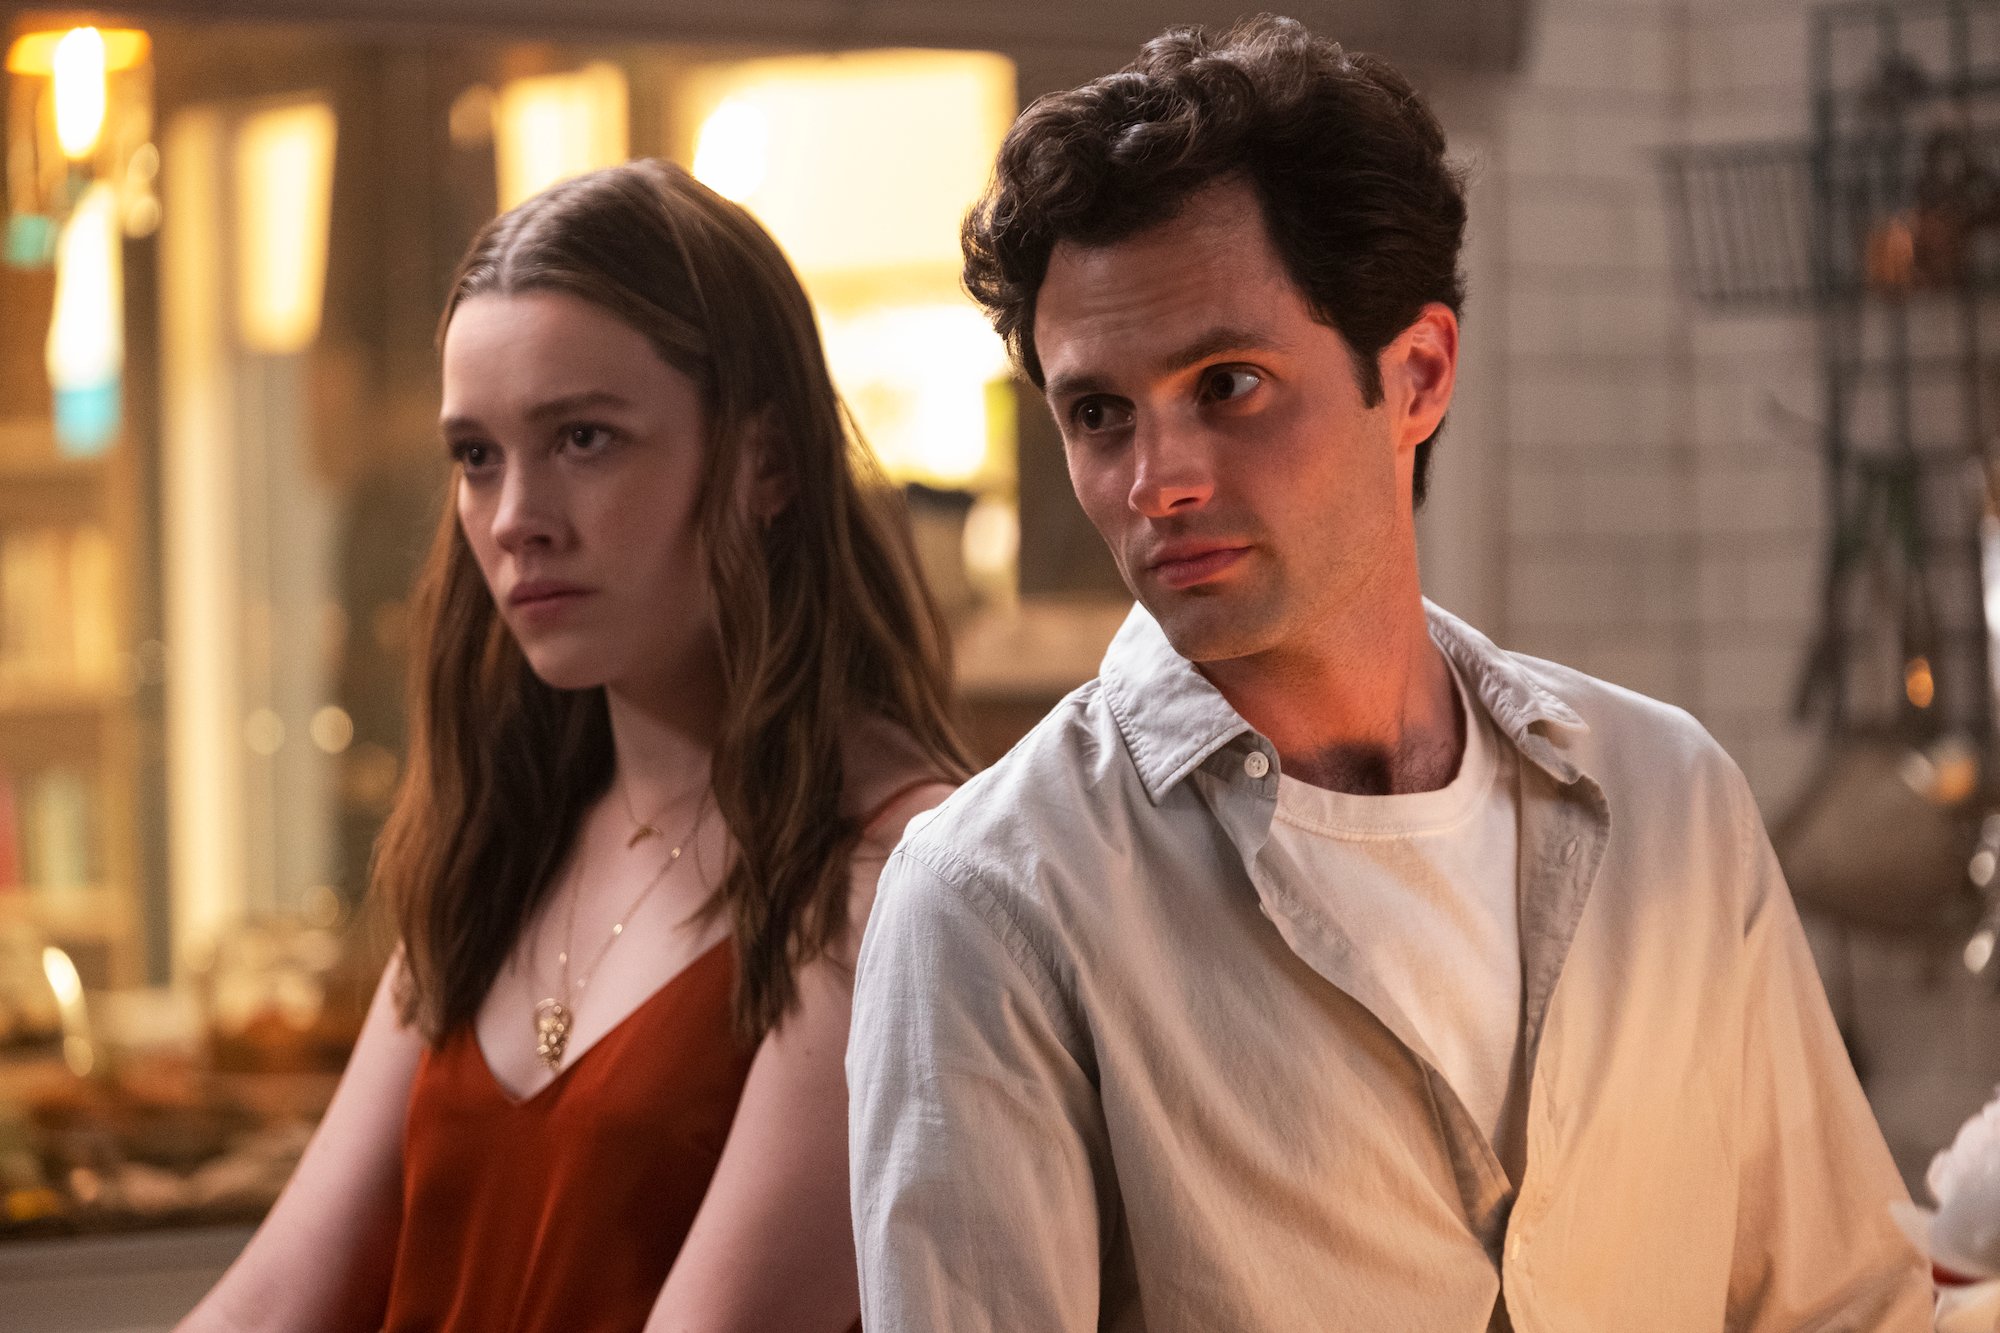 A production still of Victoria Pedretti and Penn Badgley as Love Quinn and Joe Goldberg in Netflix's 'YOU'